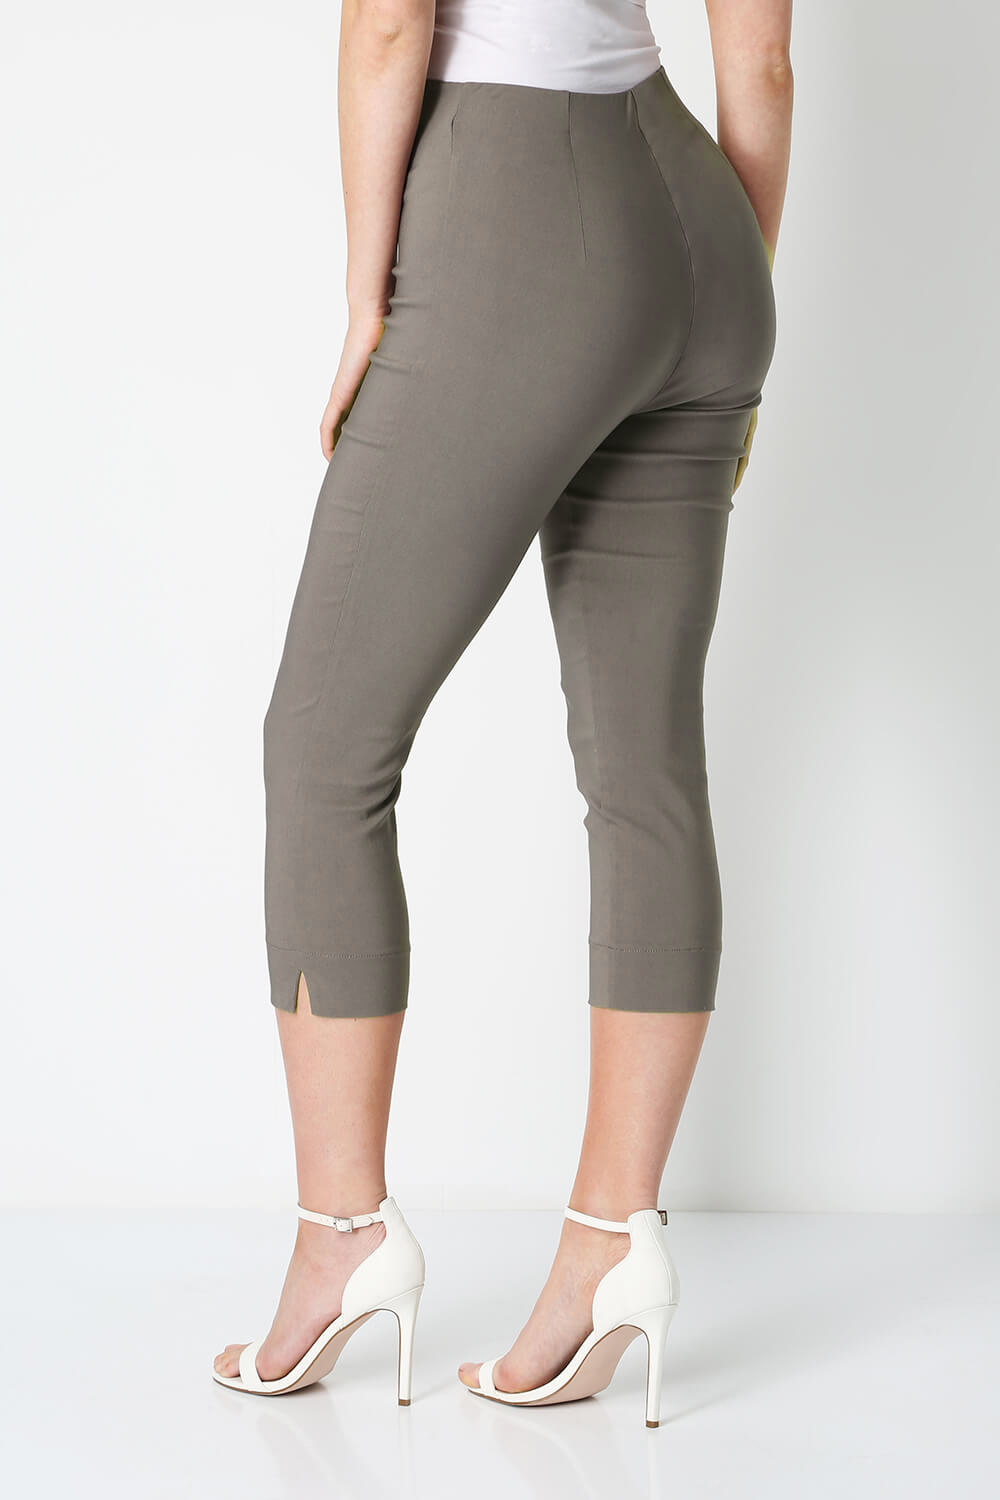 Chocolate Cropped Stretch Trouser, Image 2 of 4